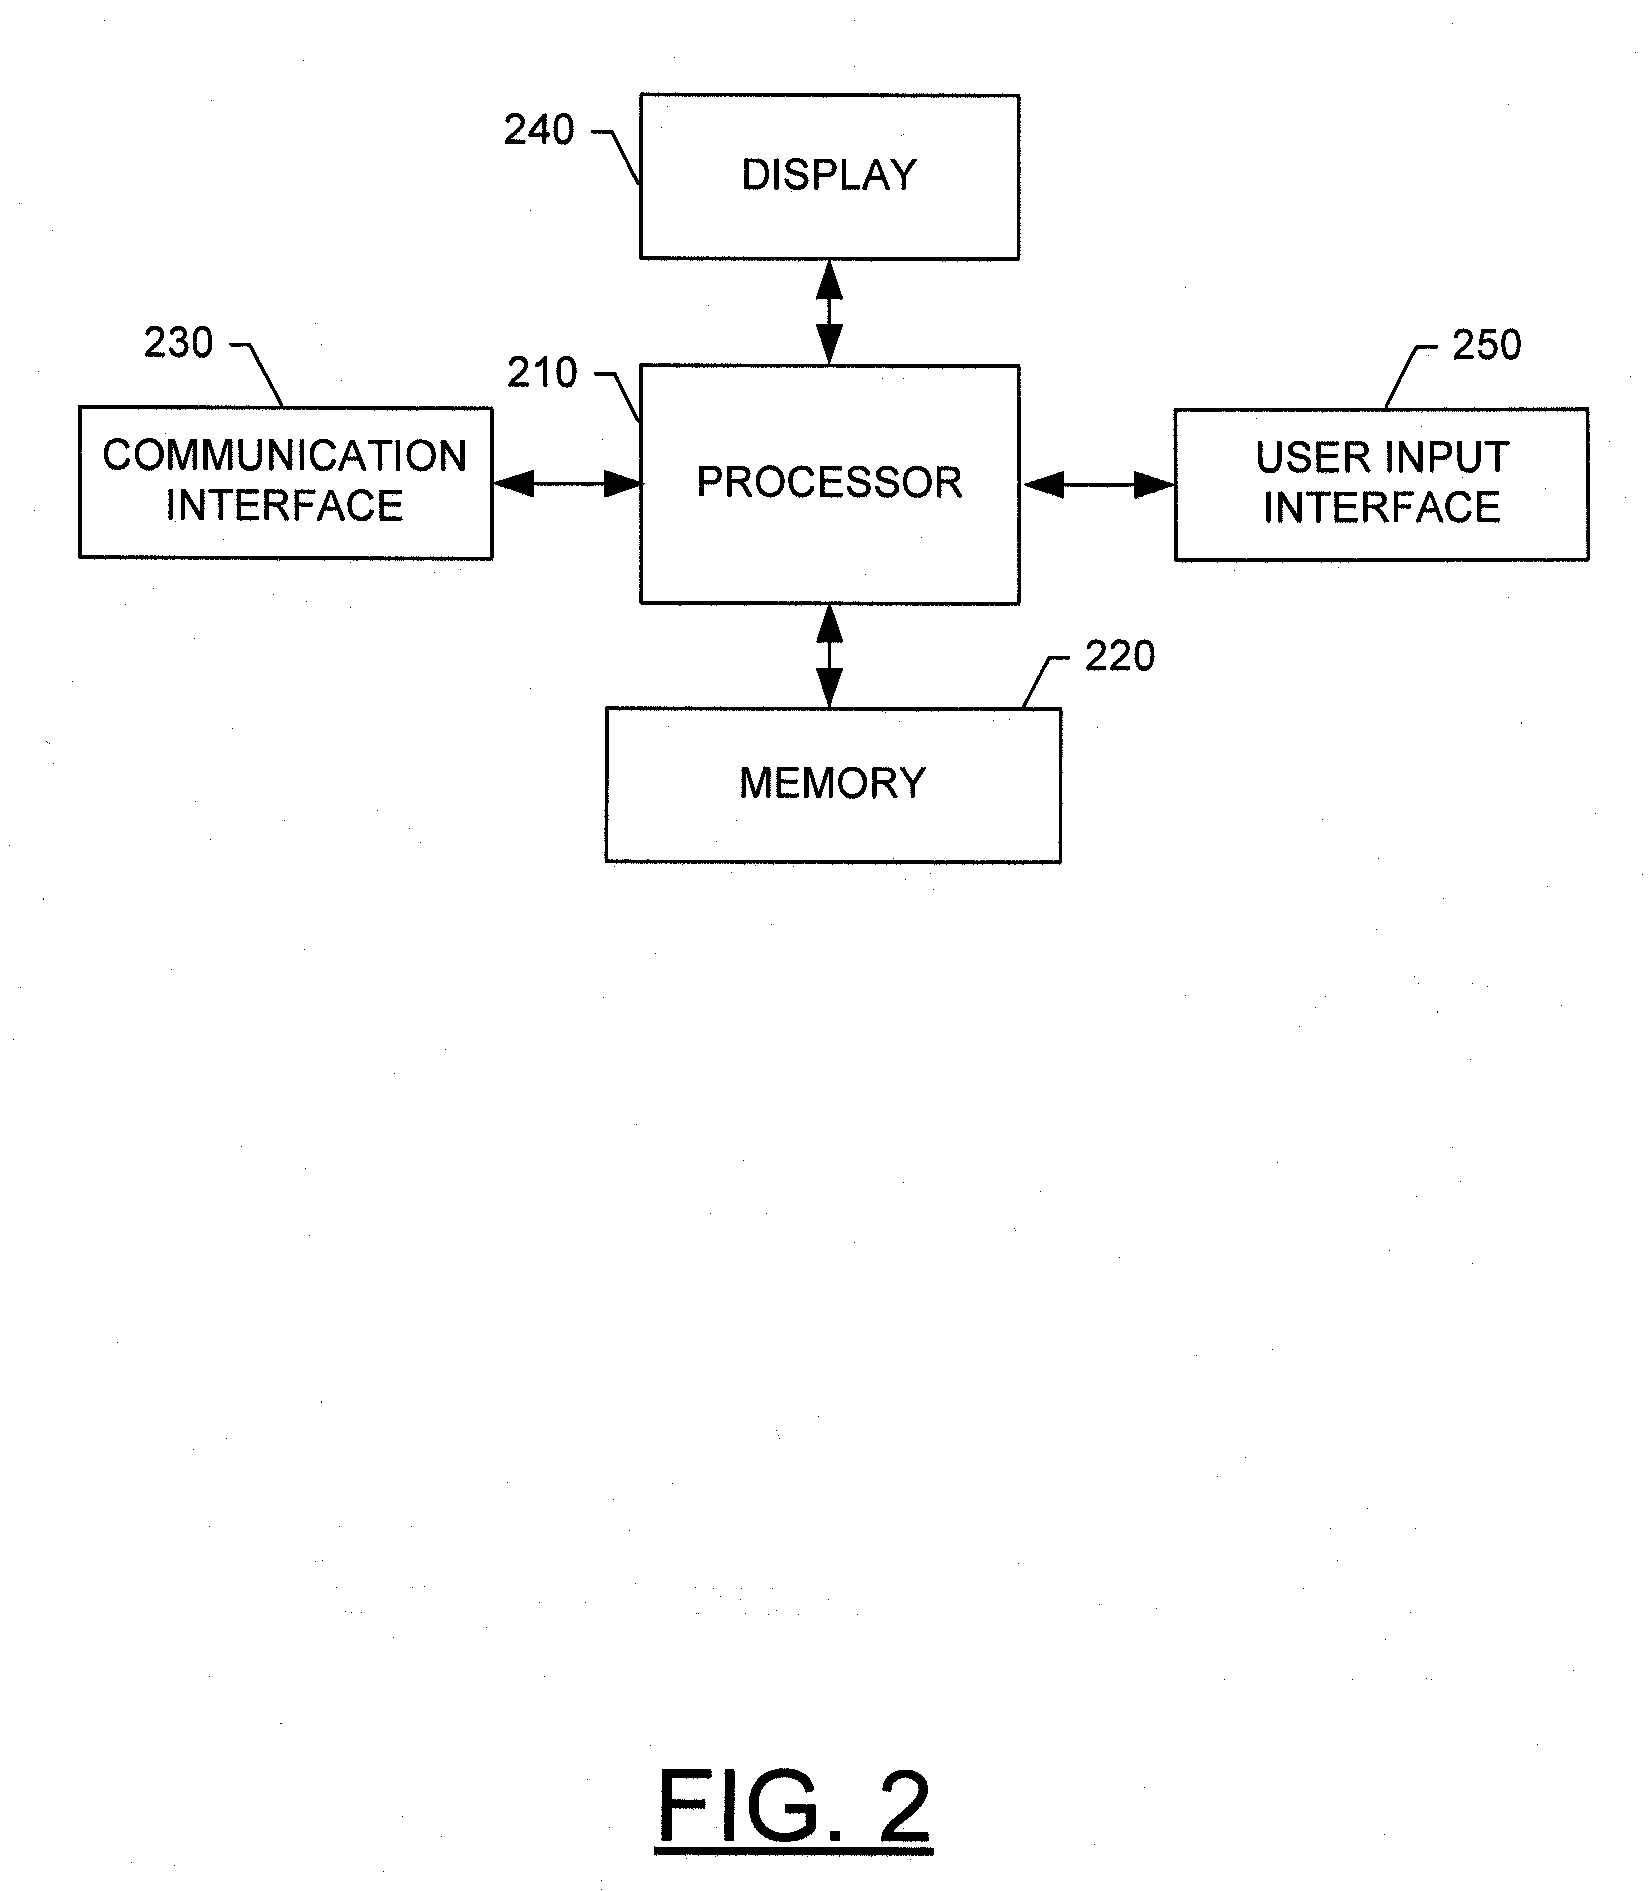 Apparatus, method and computer program product for filtering media files